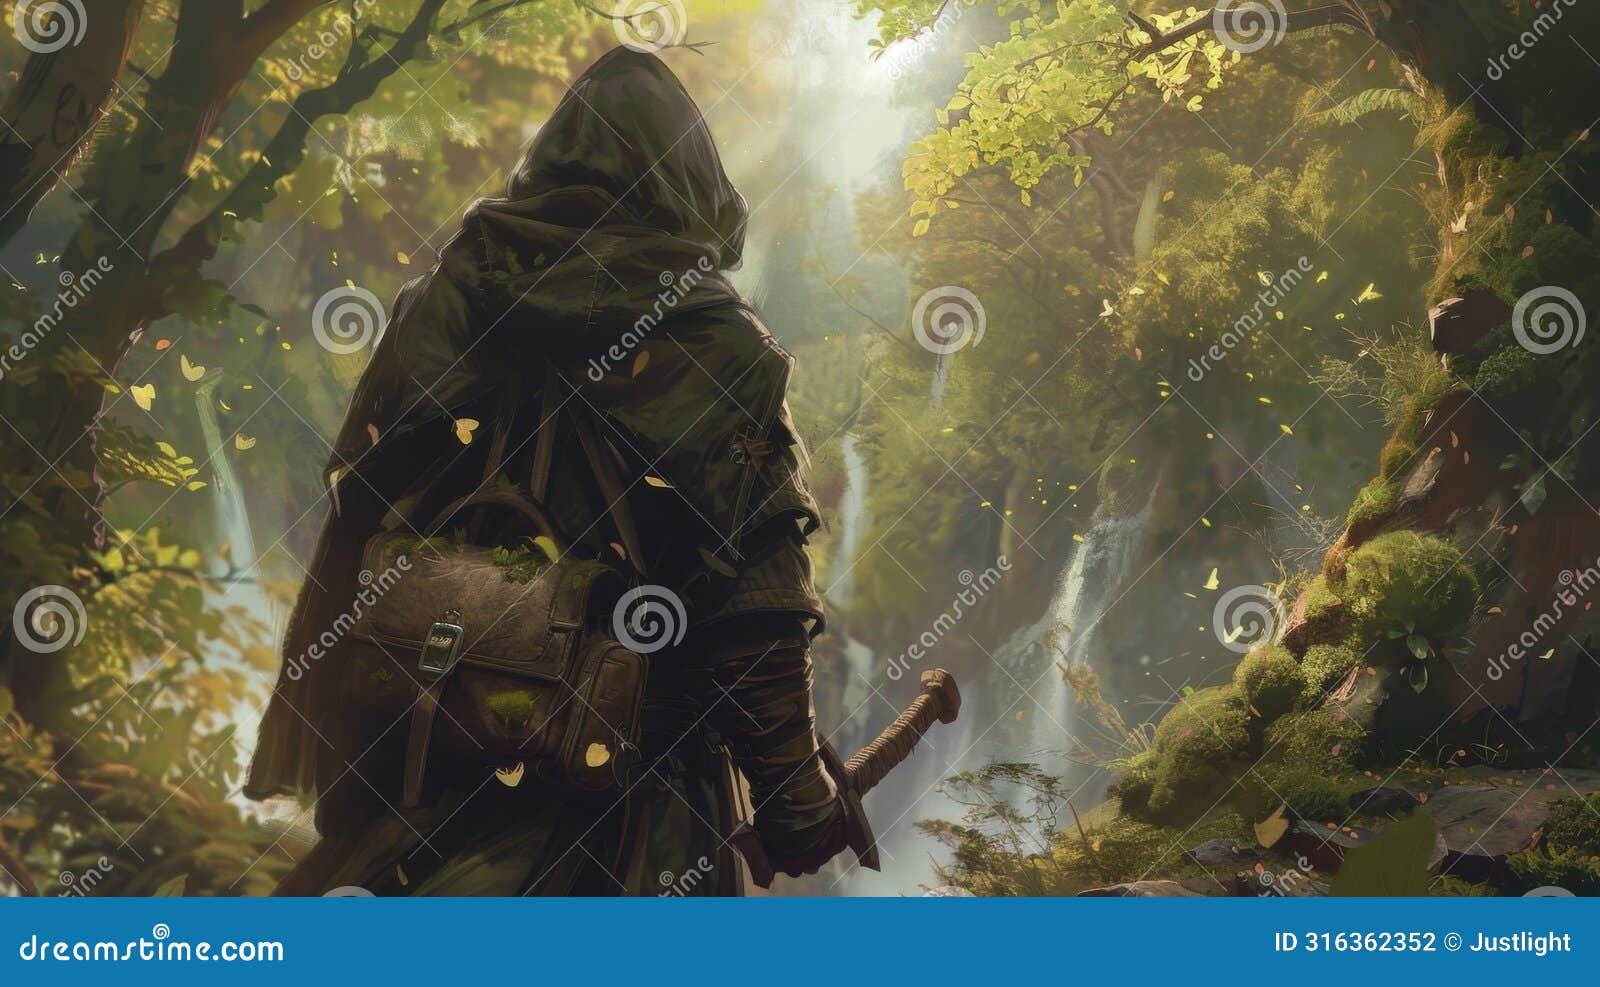 amidst a lush forest a hooded figure roams with a leather satchel sped to their belt. this traveling healer has a vast